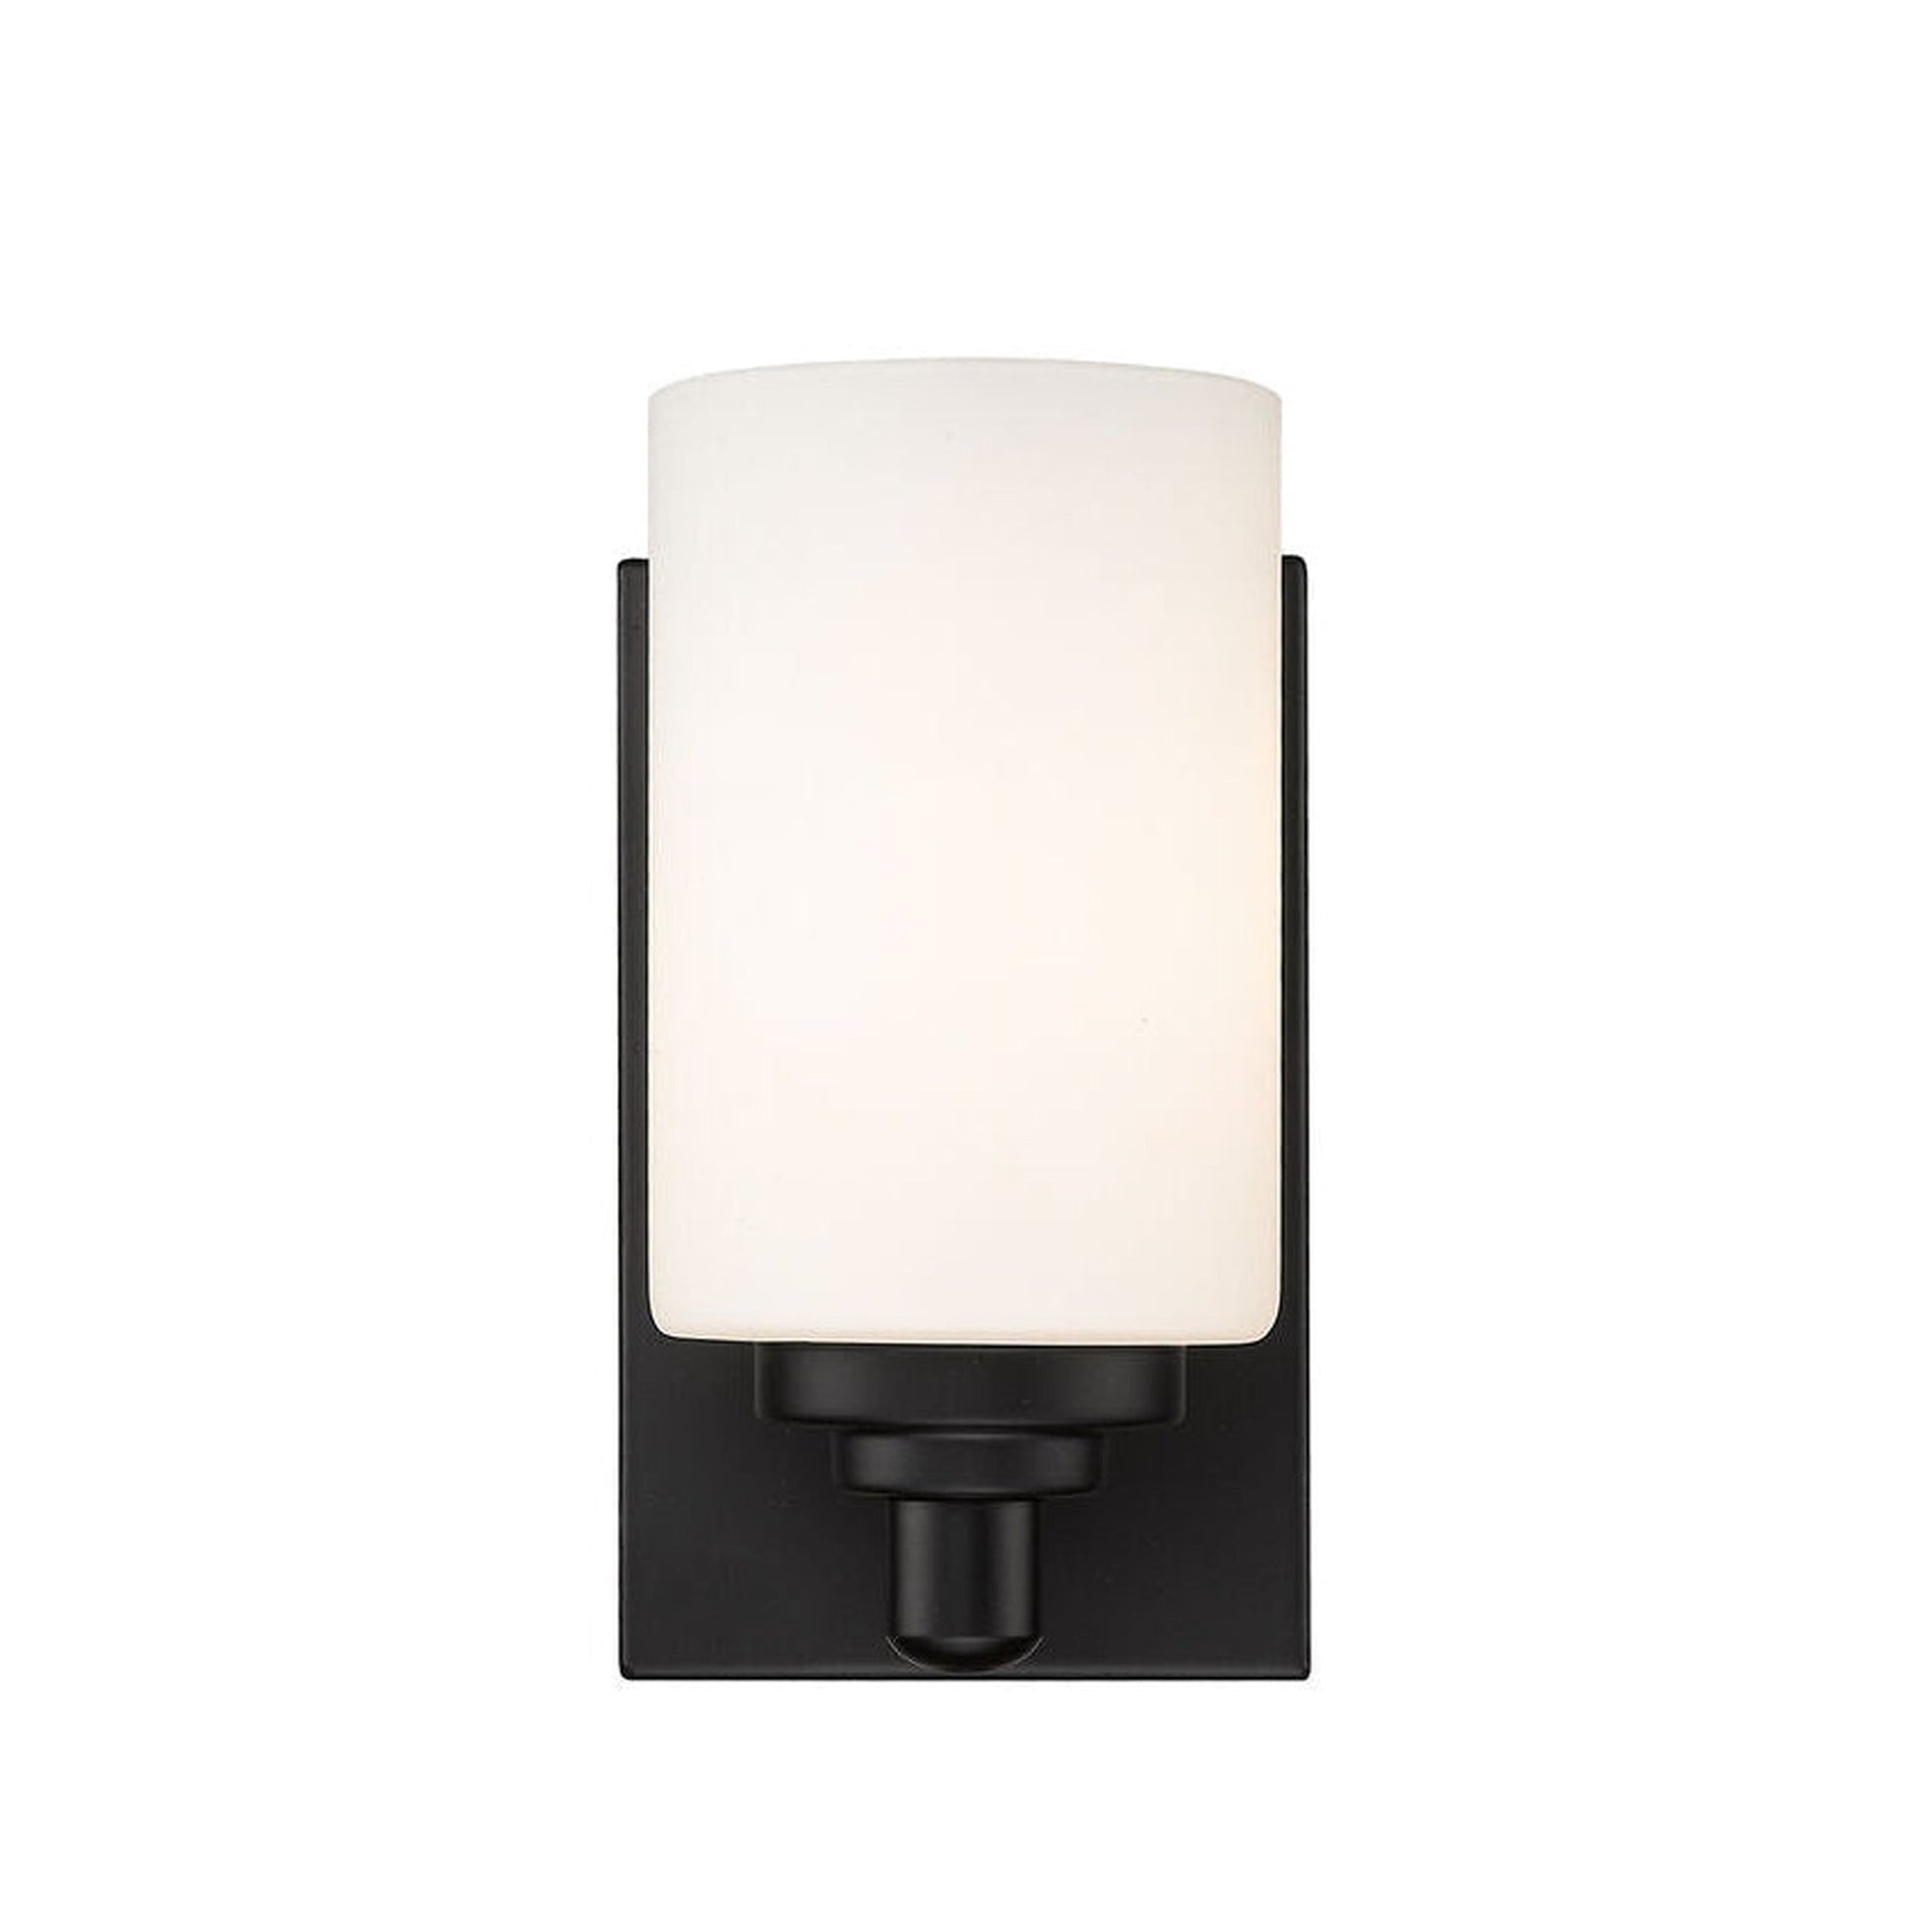 Z-Lite Soledad 5" 1-Light Matte Black Wall Sconce With White Glass Shade